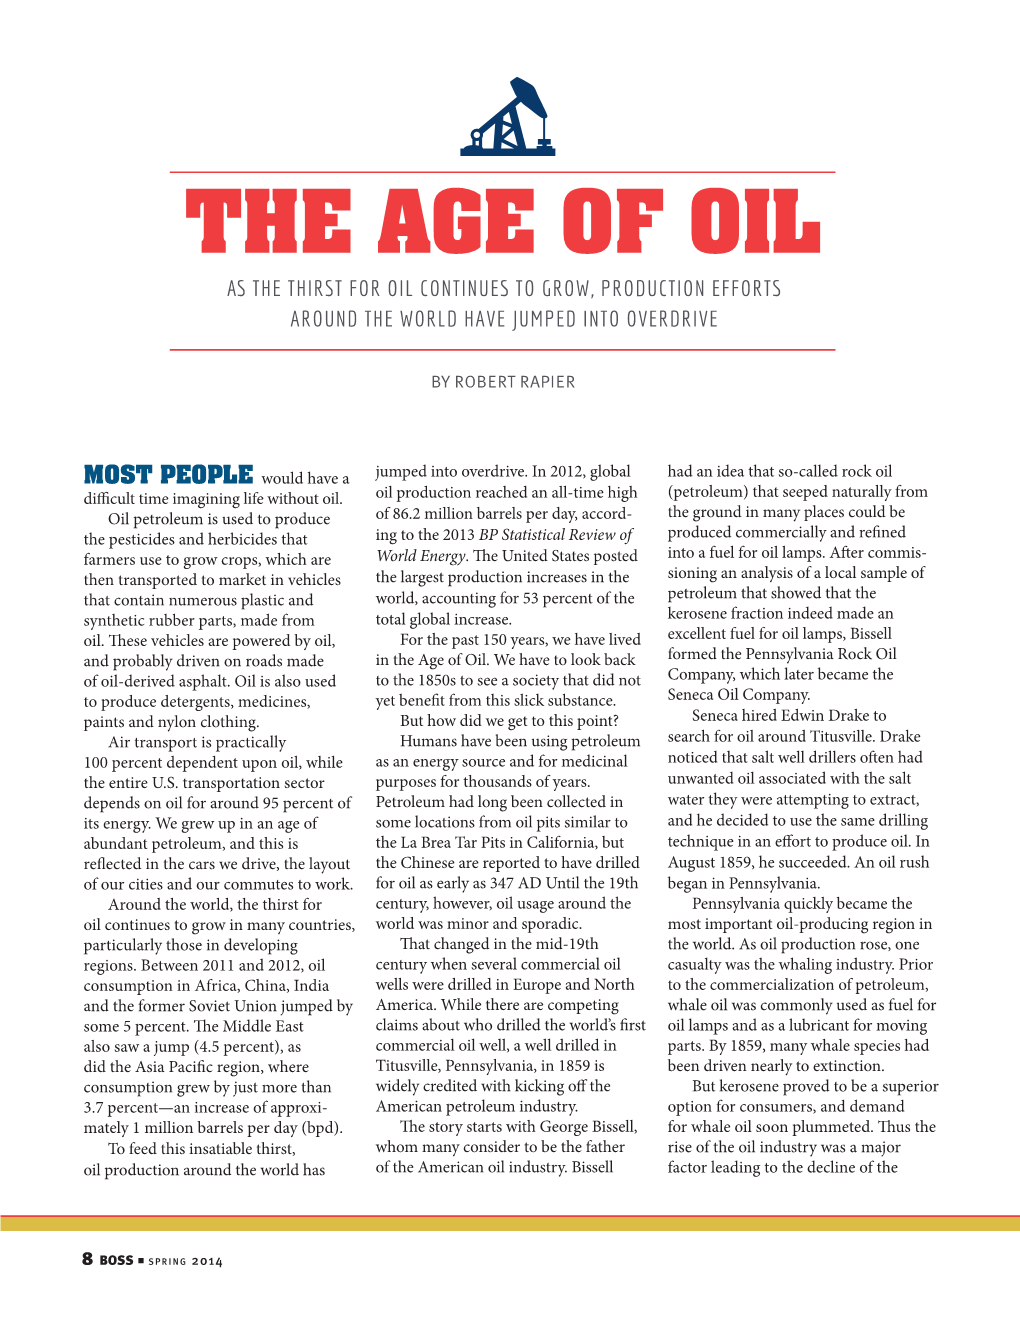 The Age of Oil As the Thirst for Oil Continues to Grow, Production Efforts Around the World Have Jumped Into Overdrive